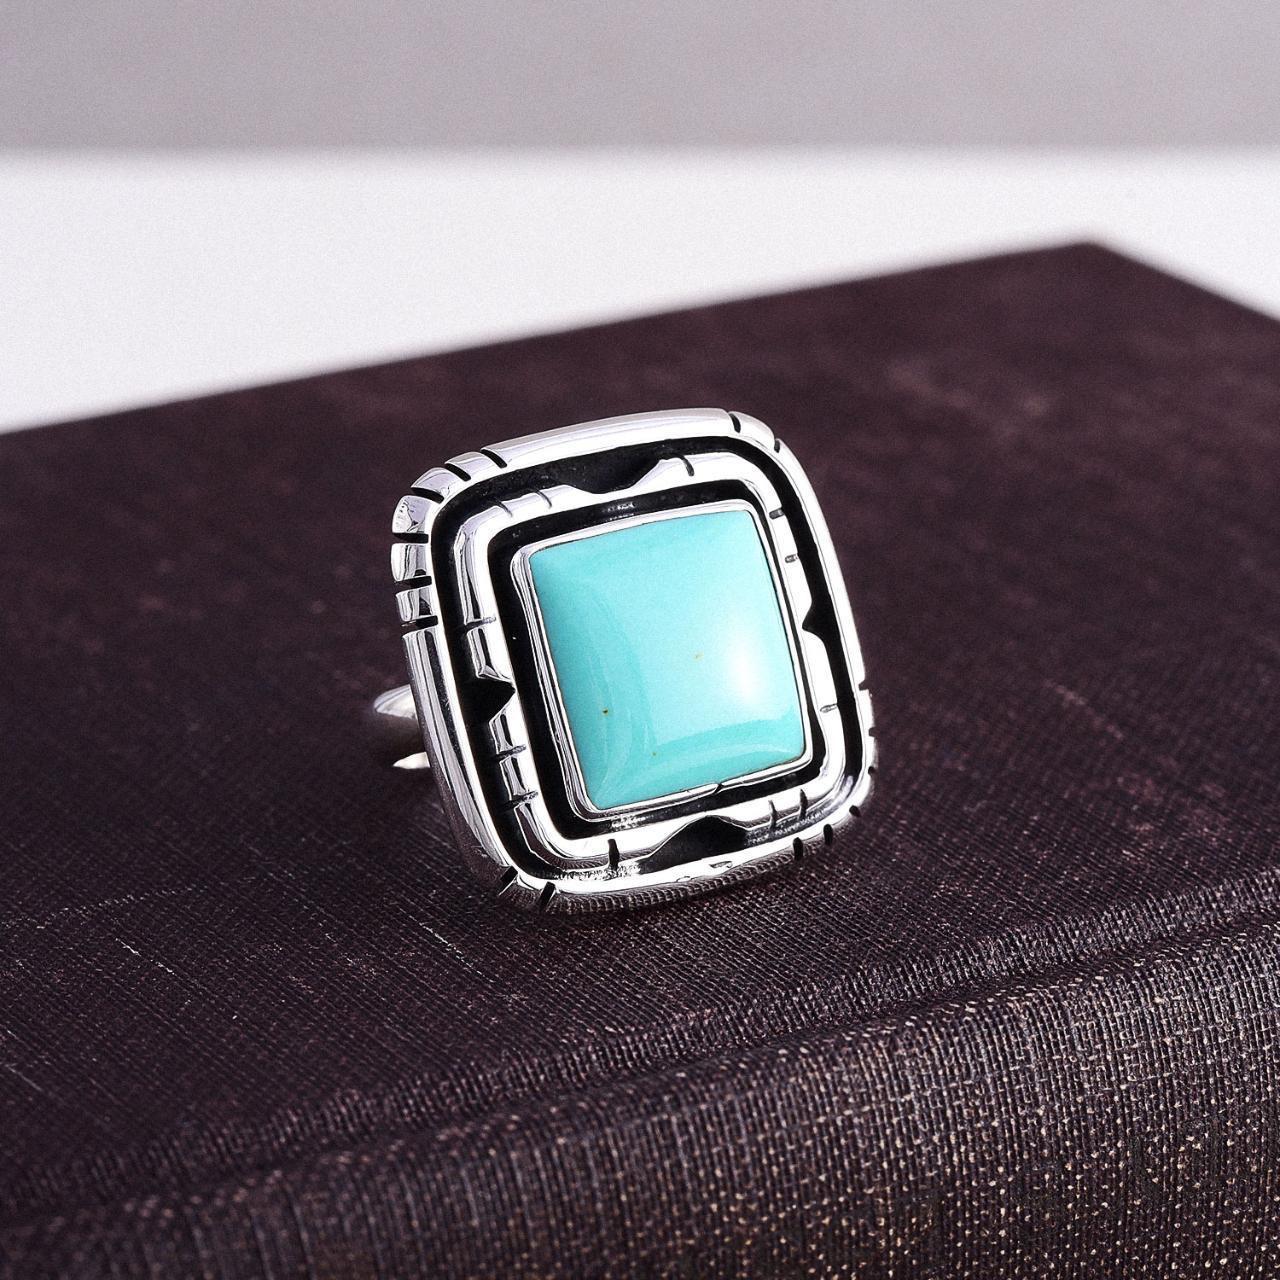 Product Image 1 - Sterling 925 Large Turquoise Ring

Sterling